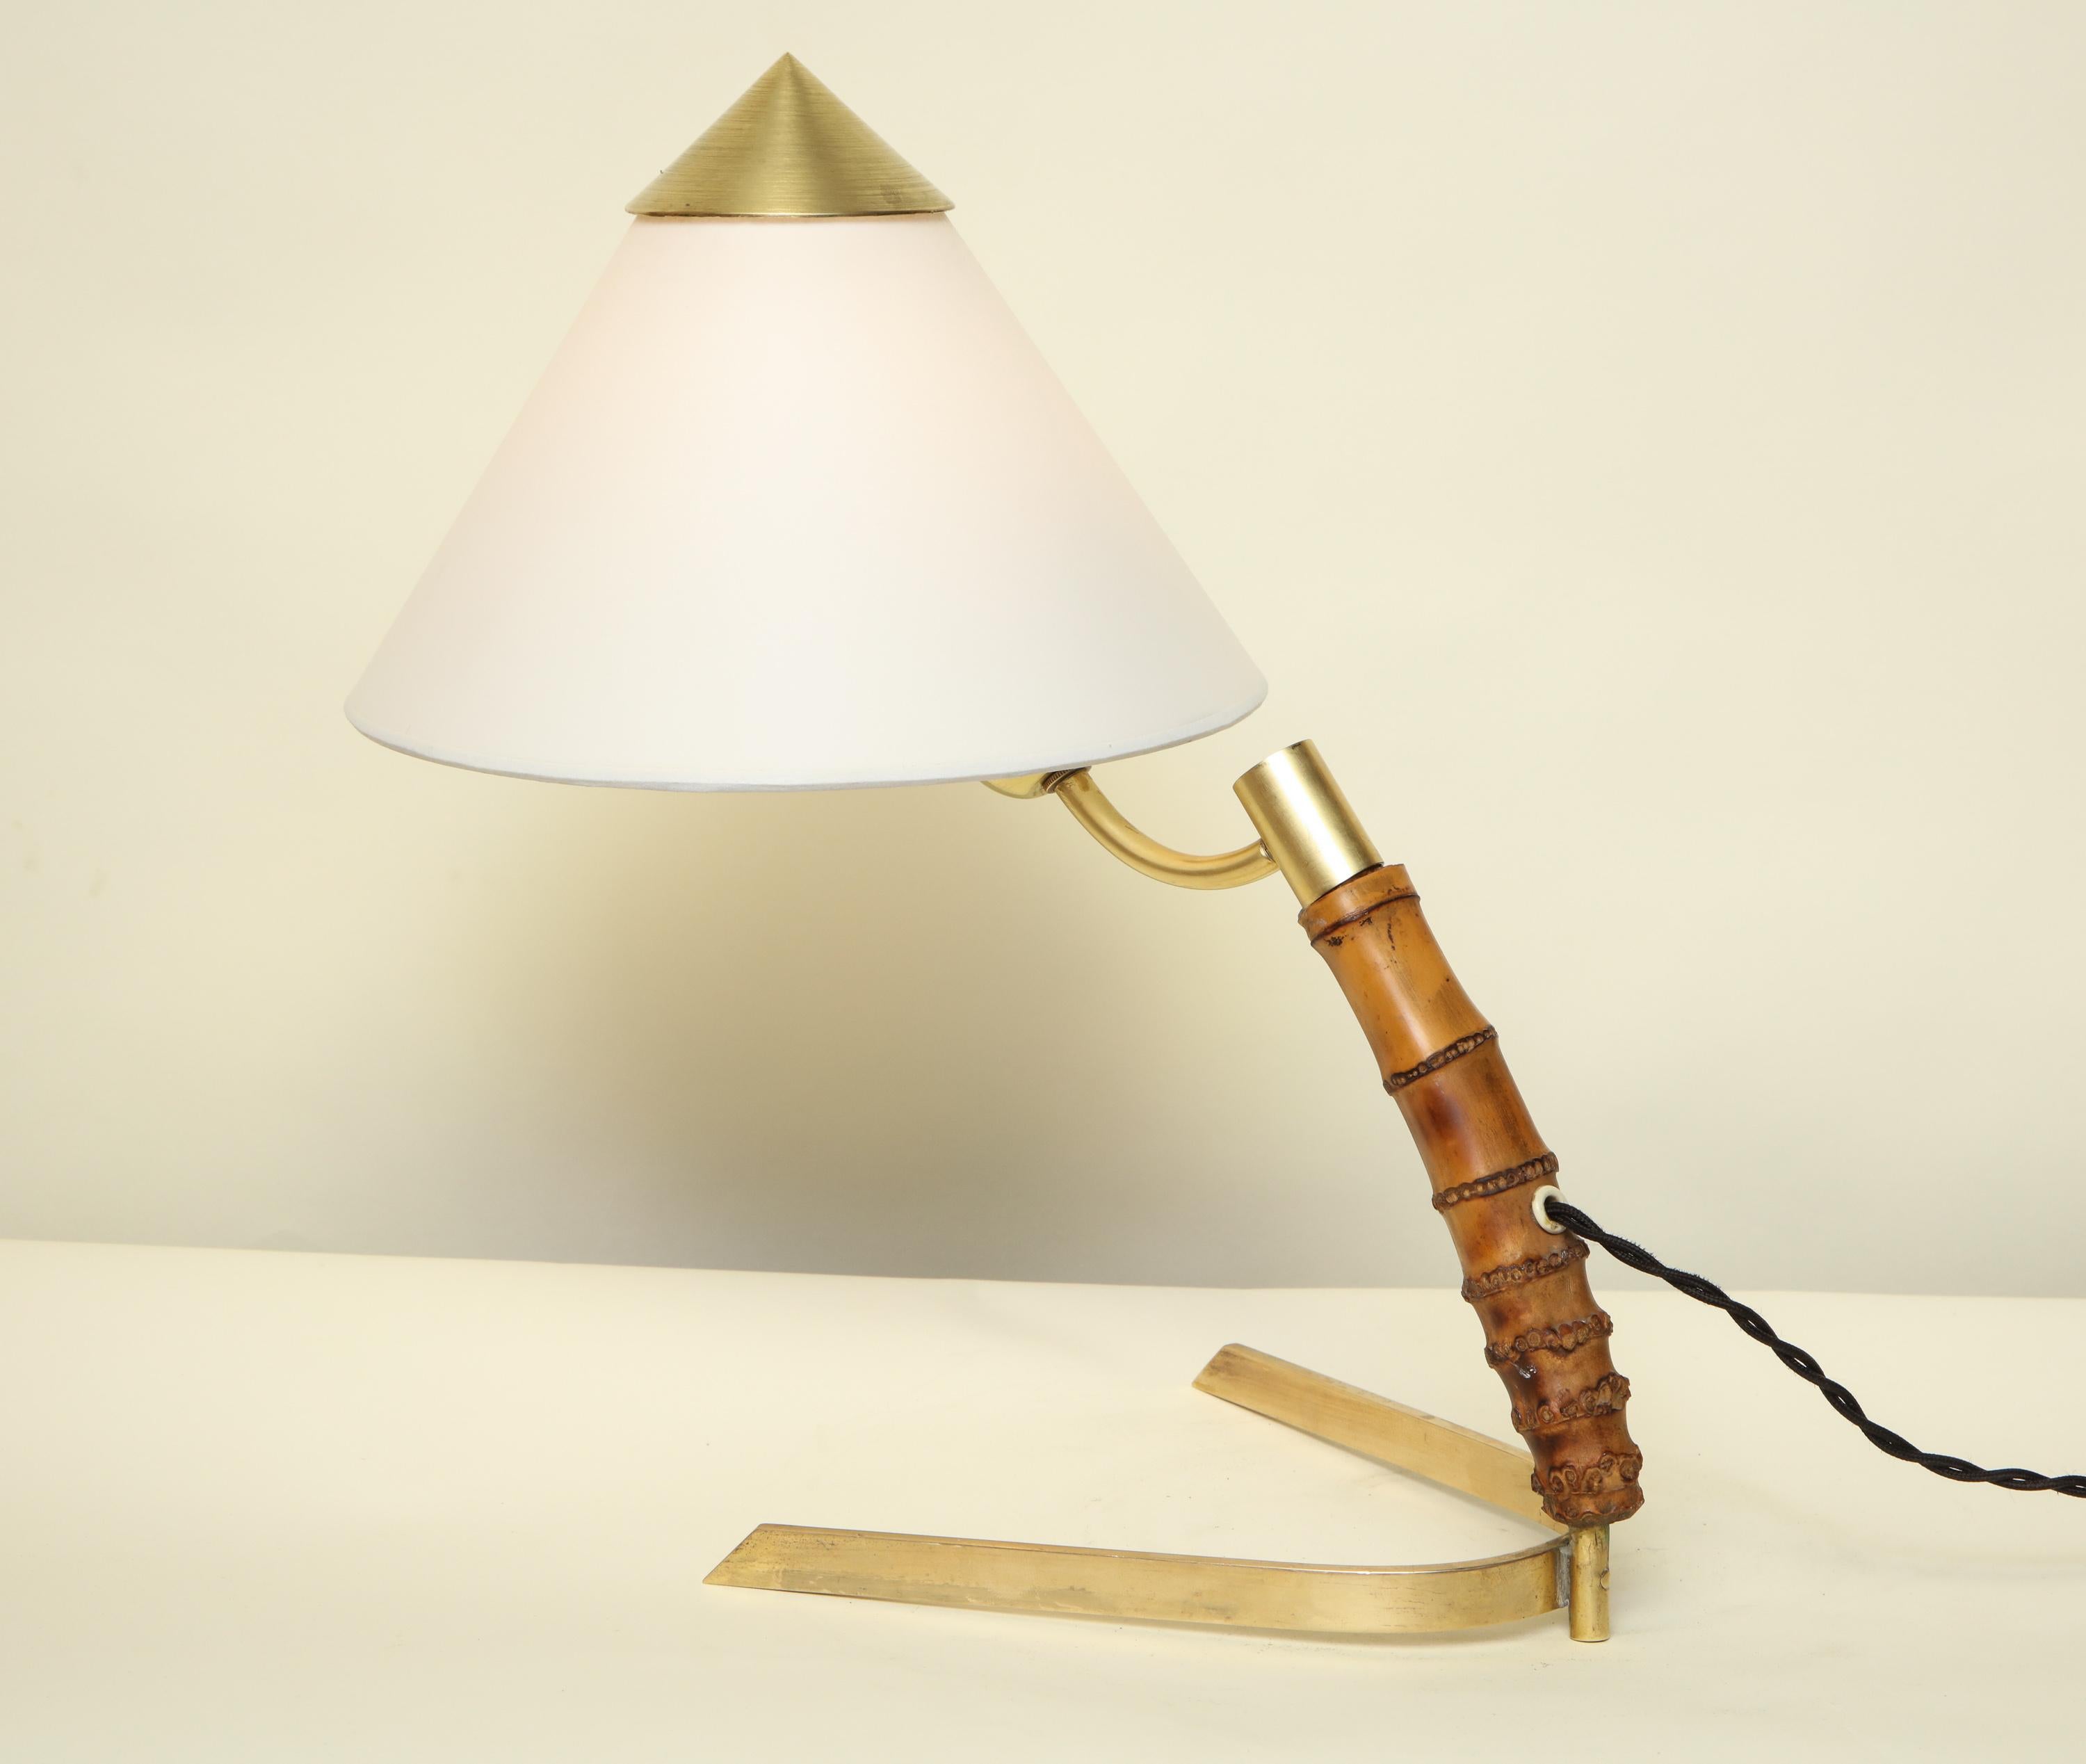 A table lamp by Kalmar Mid-Century Modern crafted of bamboo and brass with parchment paper shade
New socket and rewired.